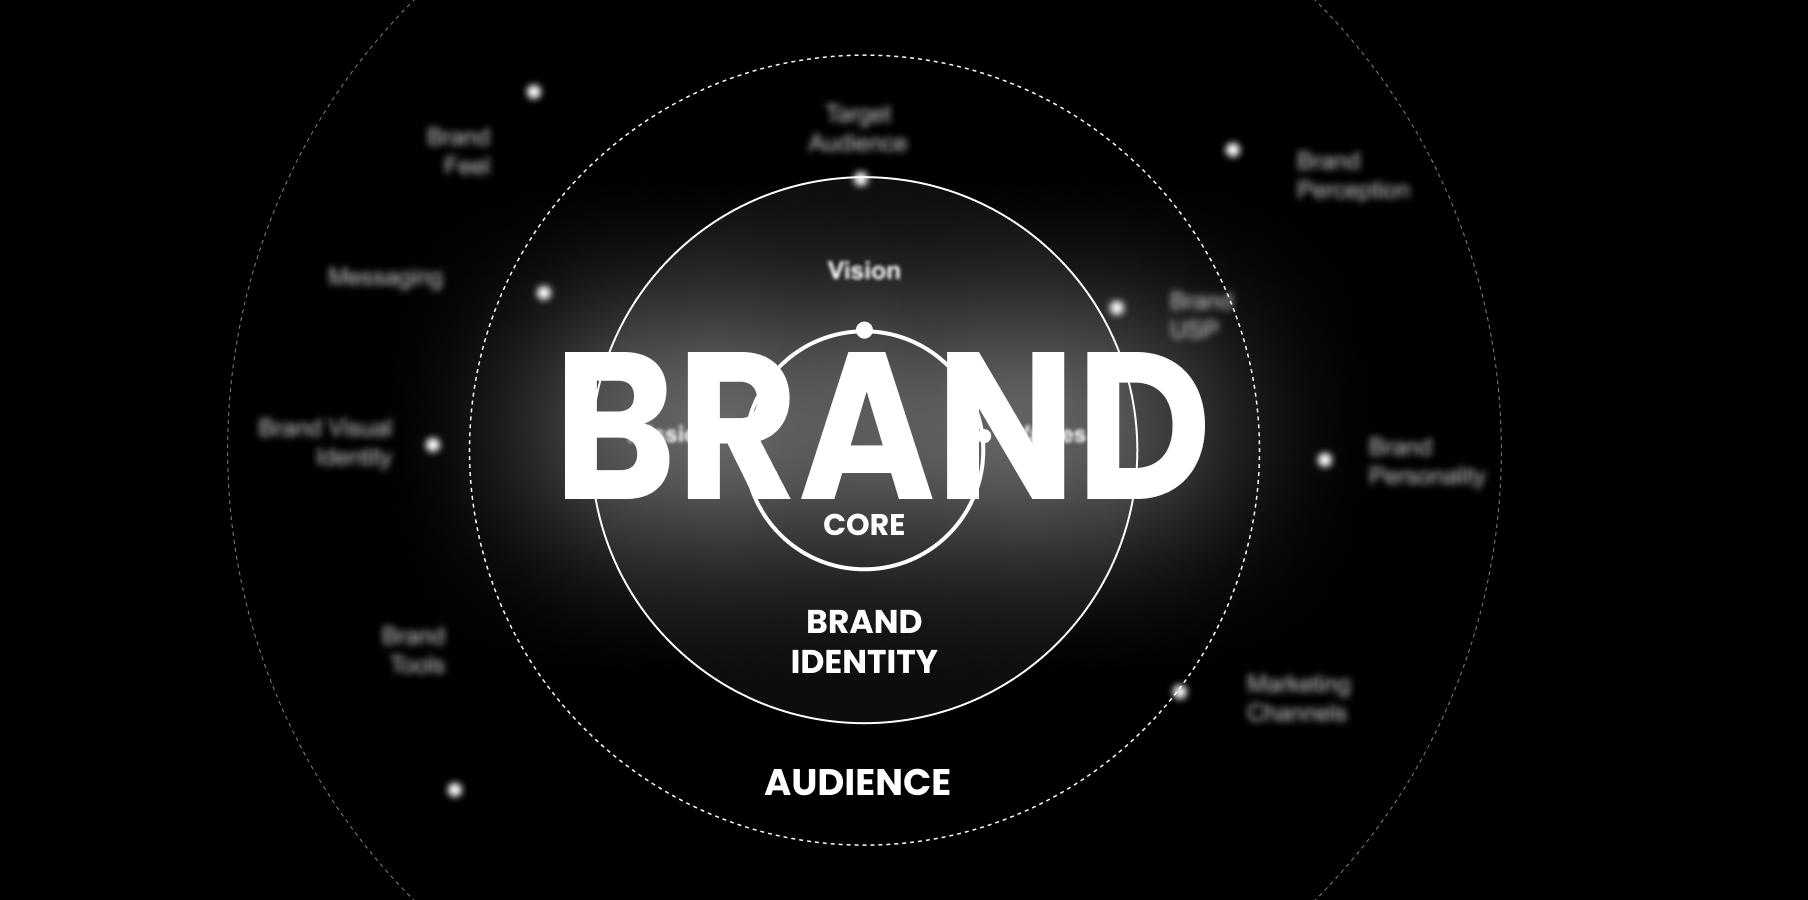 Know what actually Brand Design is